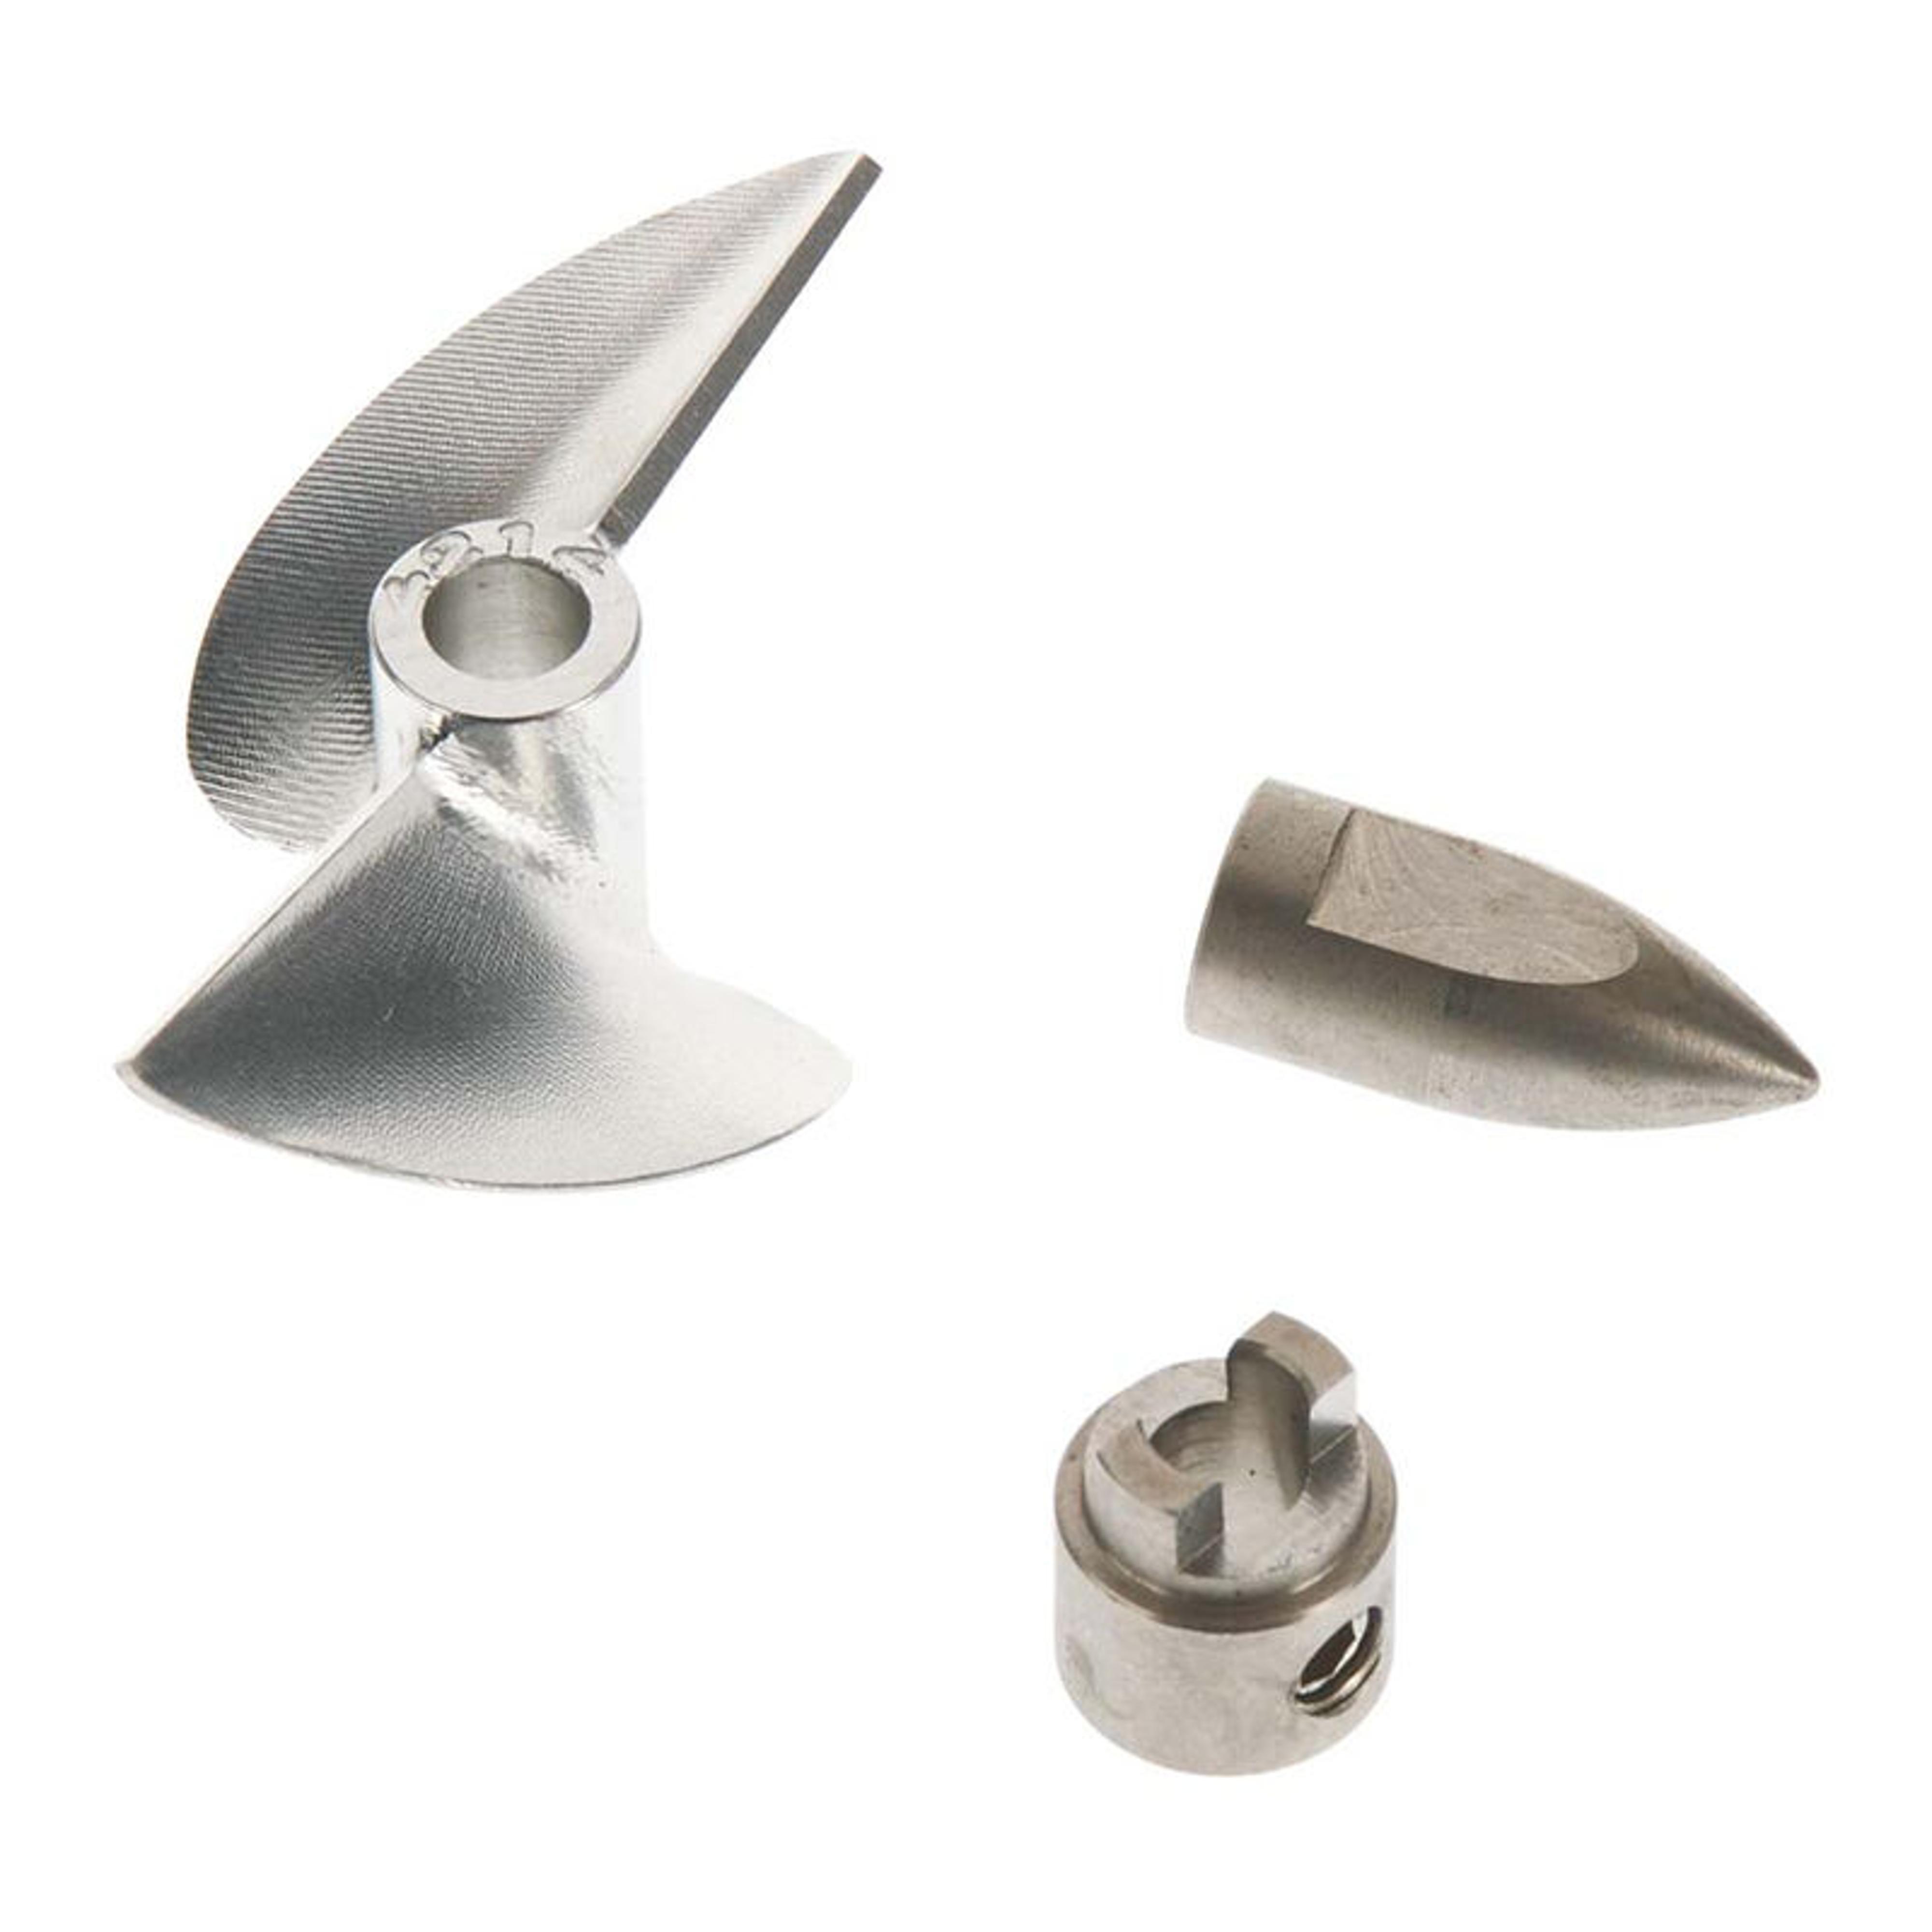 Aluminum Propeller Set with Bullet Nut and Drive Dog (M41, Spartan)